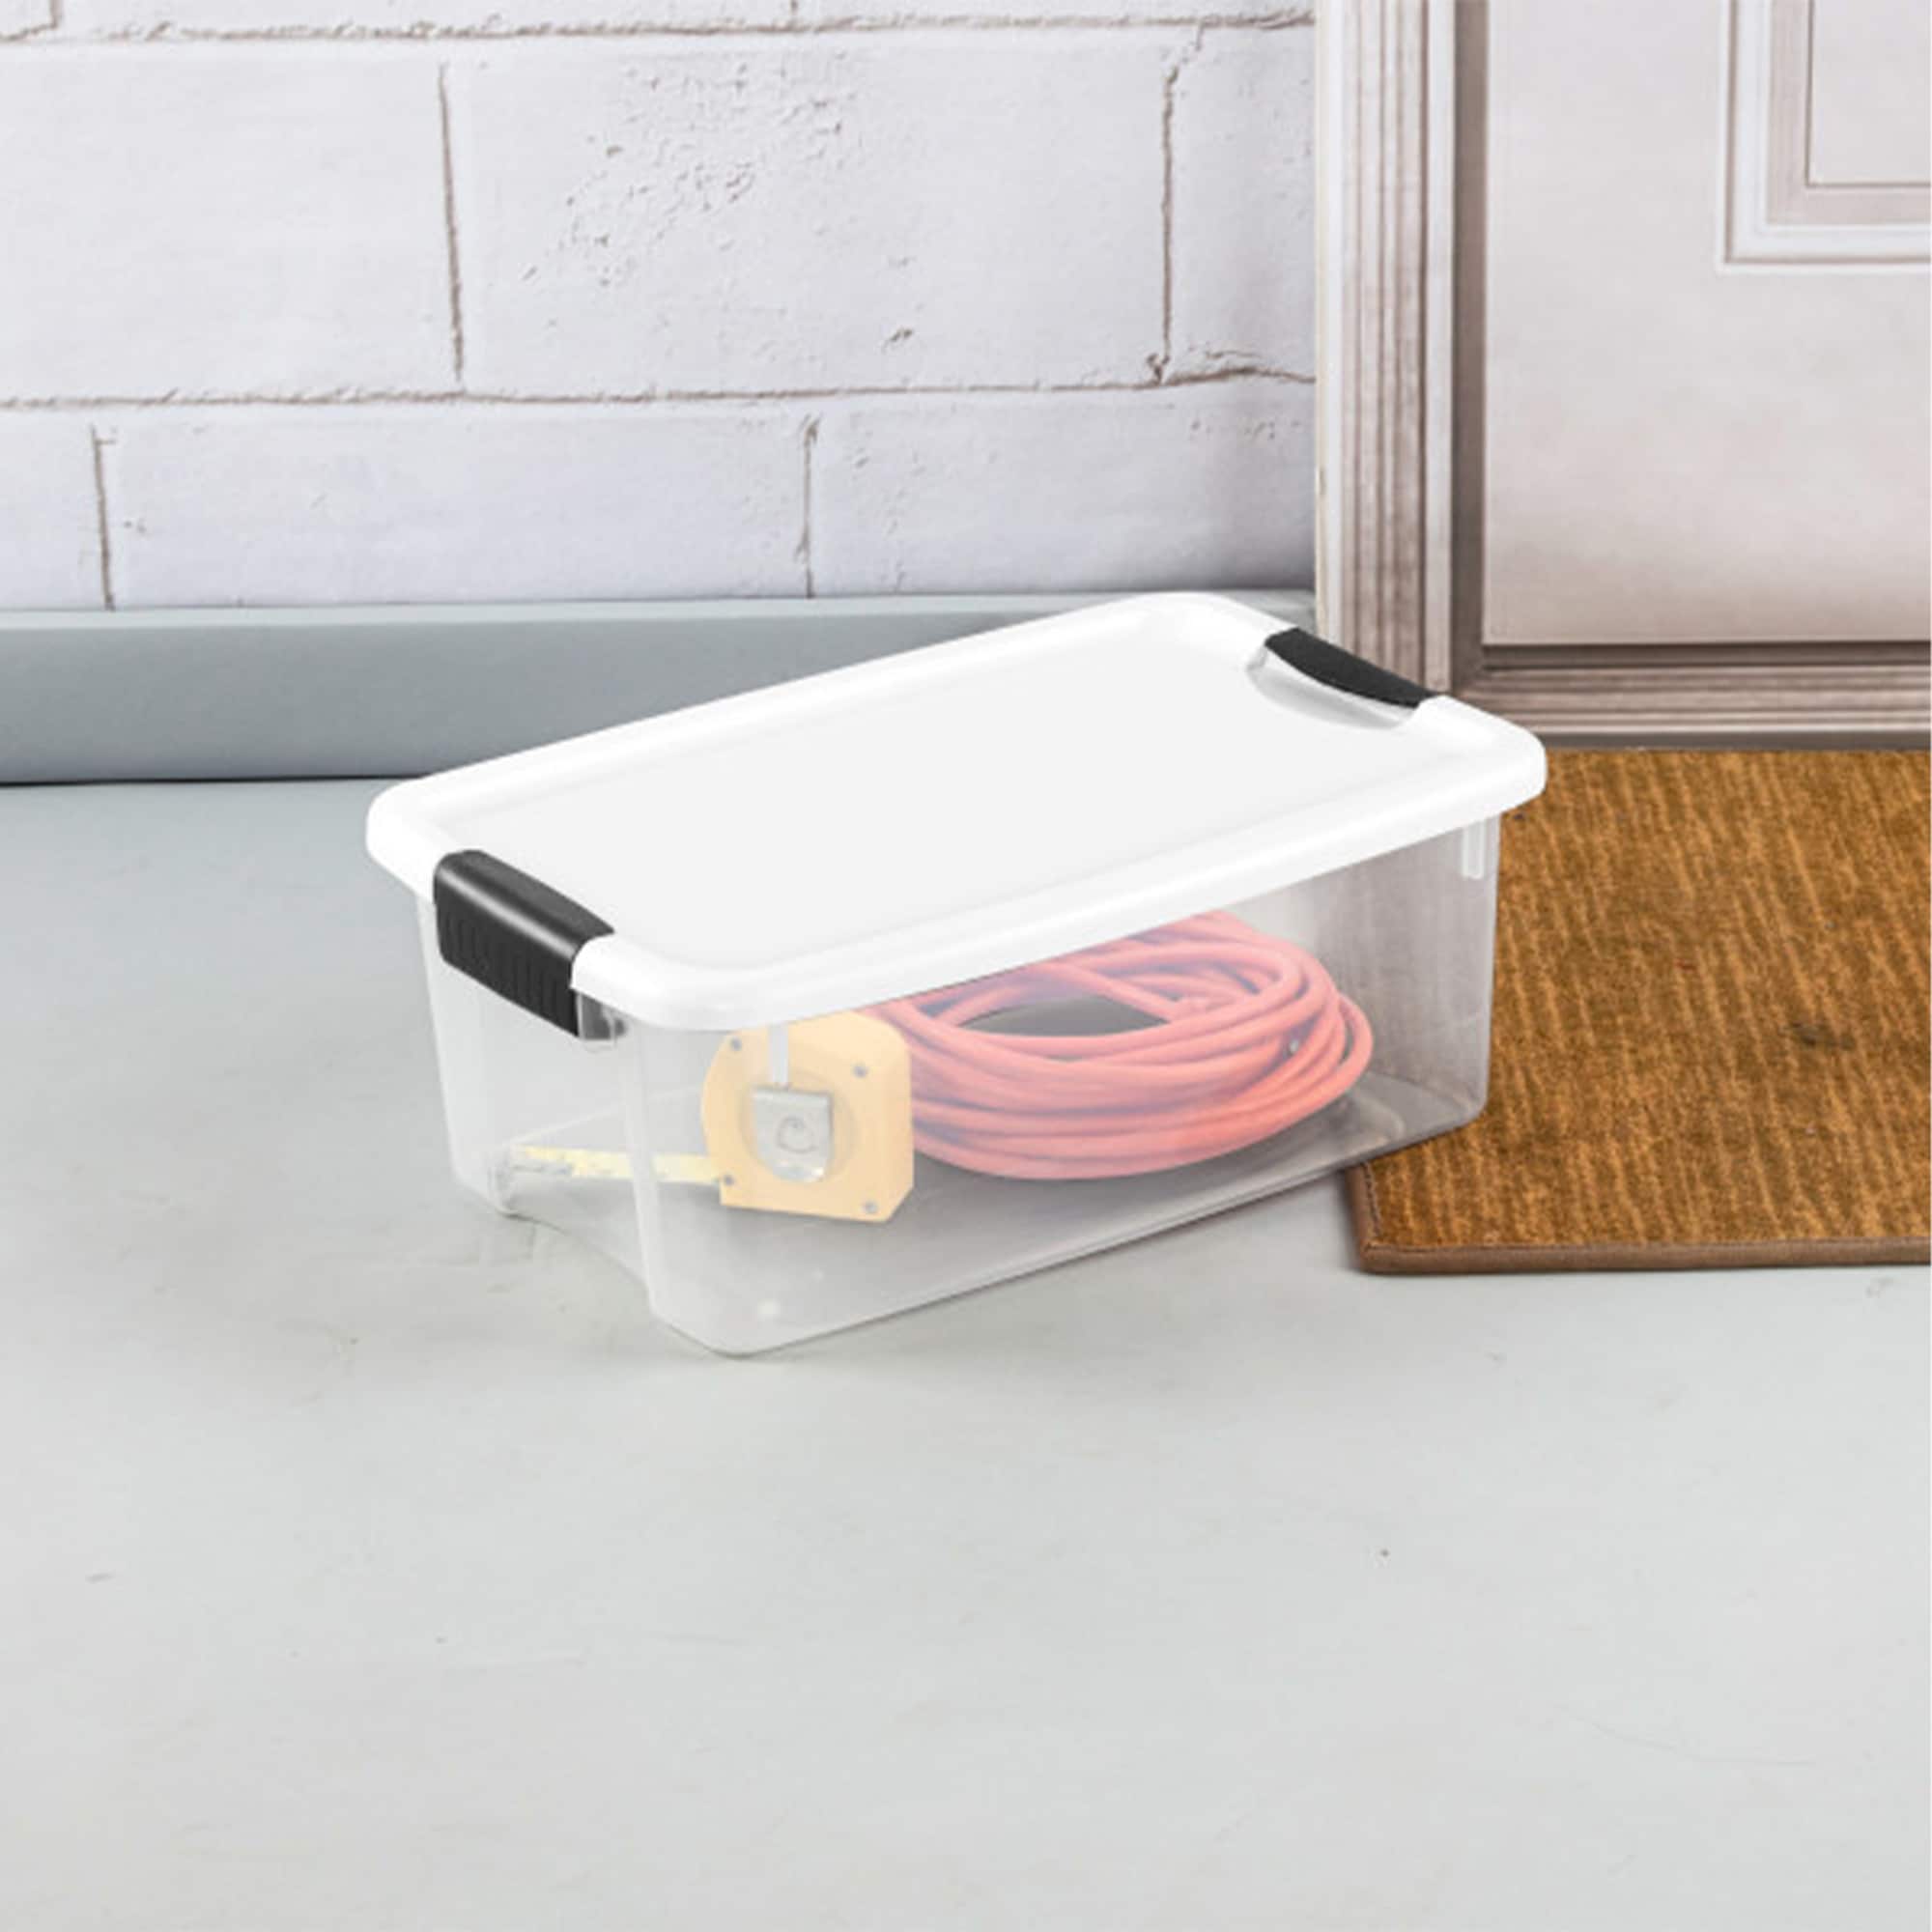 70qt Clear Storage Box with White Lid - Room Essentials™